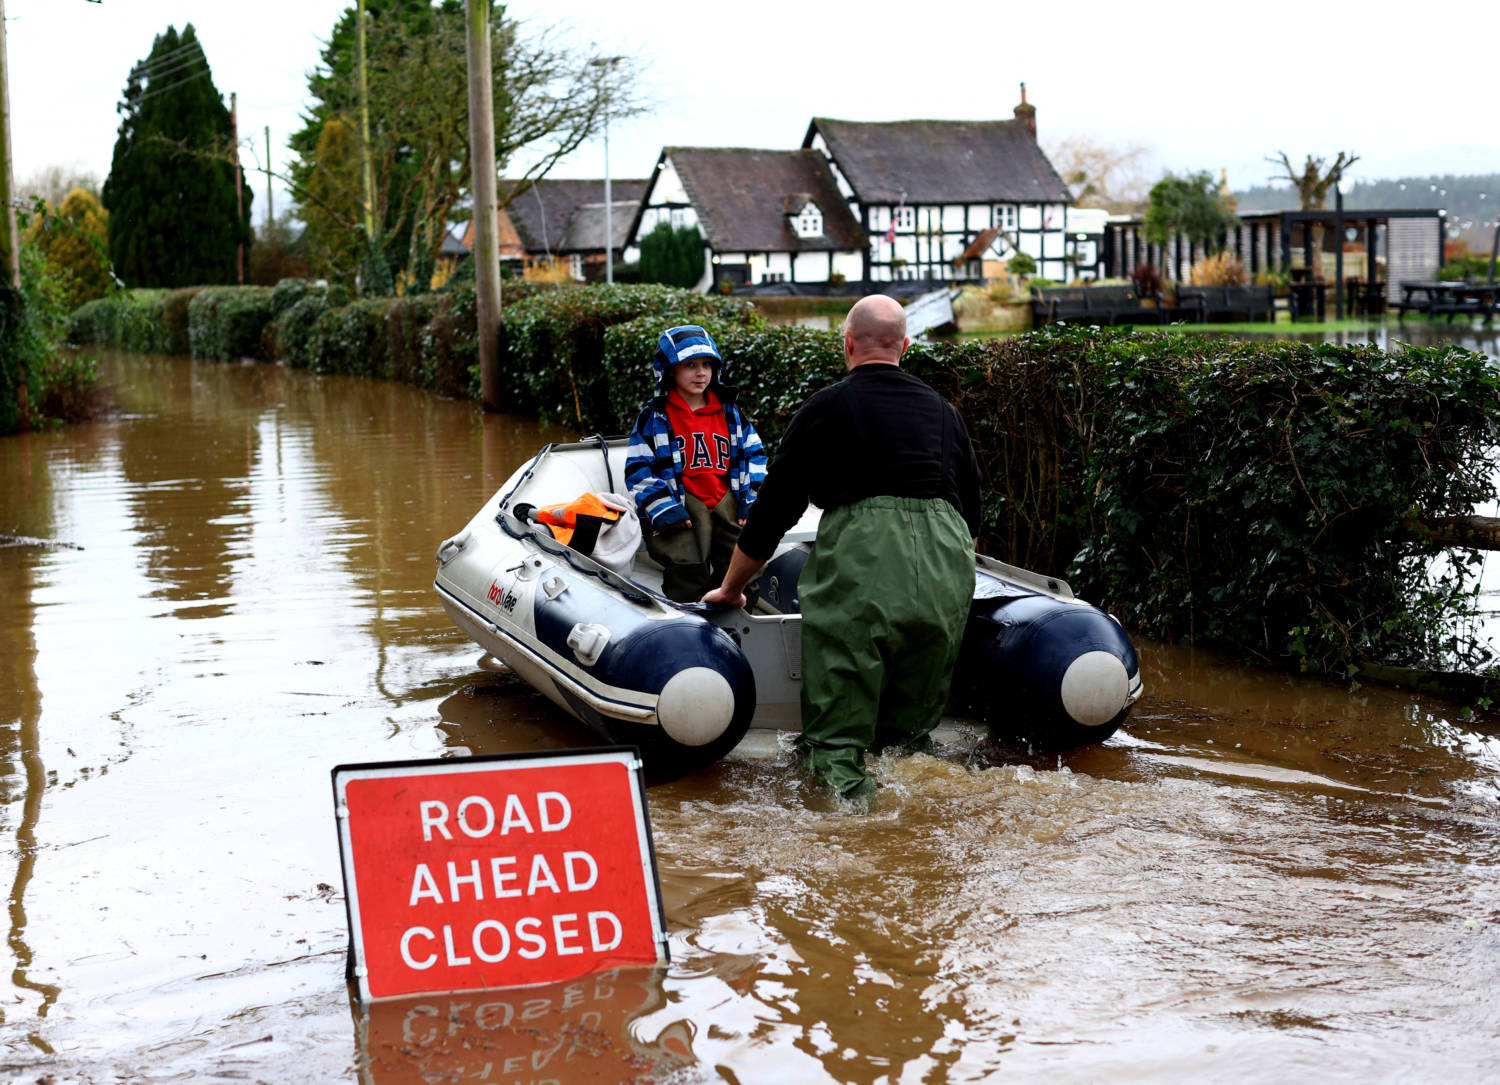 Jack, Aged 7, Is Rescued As The Village Of Severn Stoke Is Cut Off Amid Flooding After Heavy Rain From Storm Henk